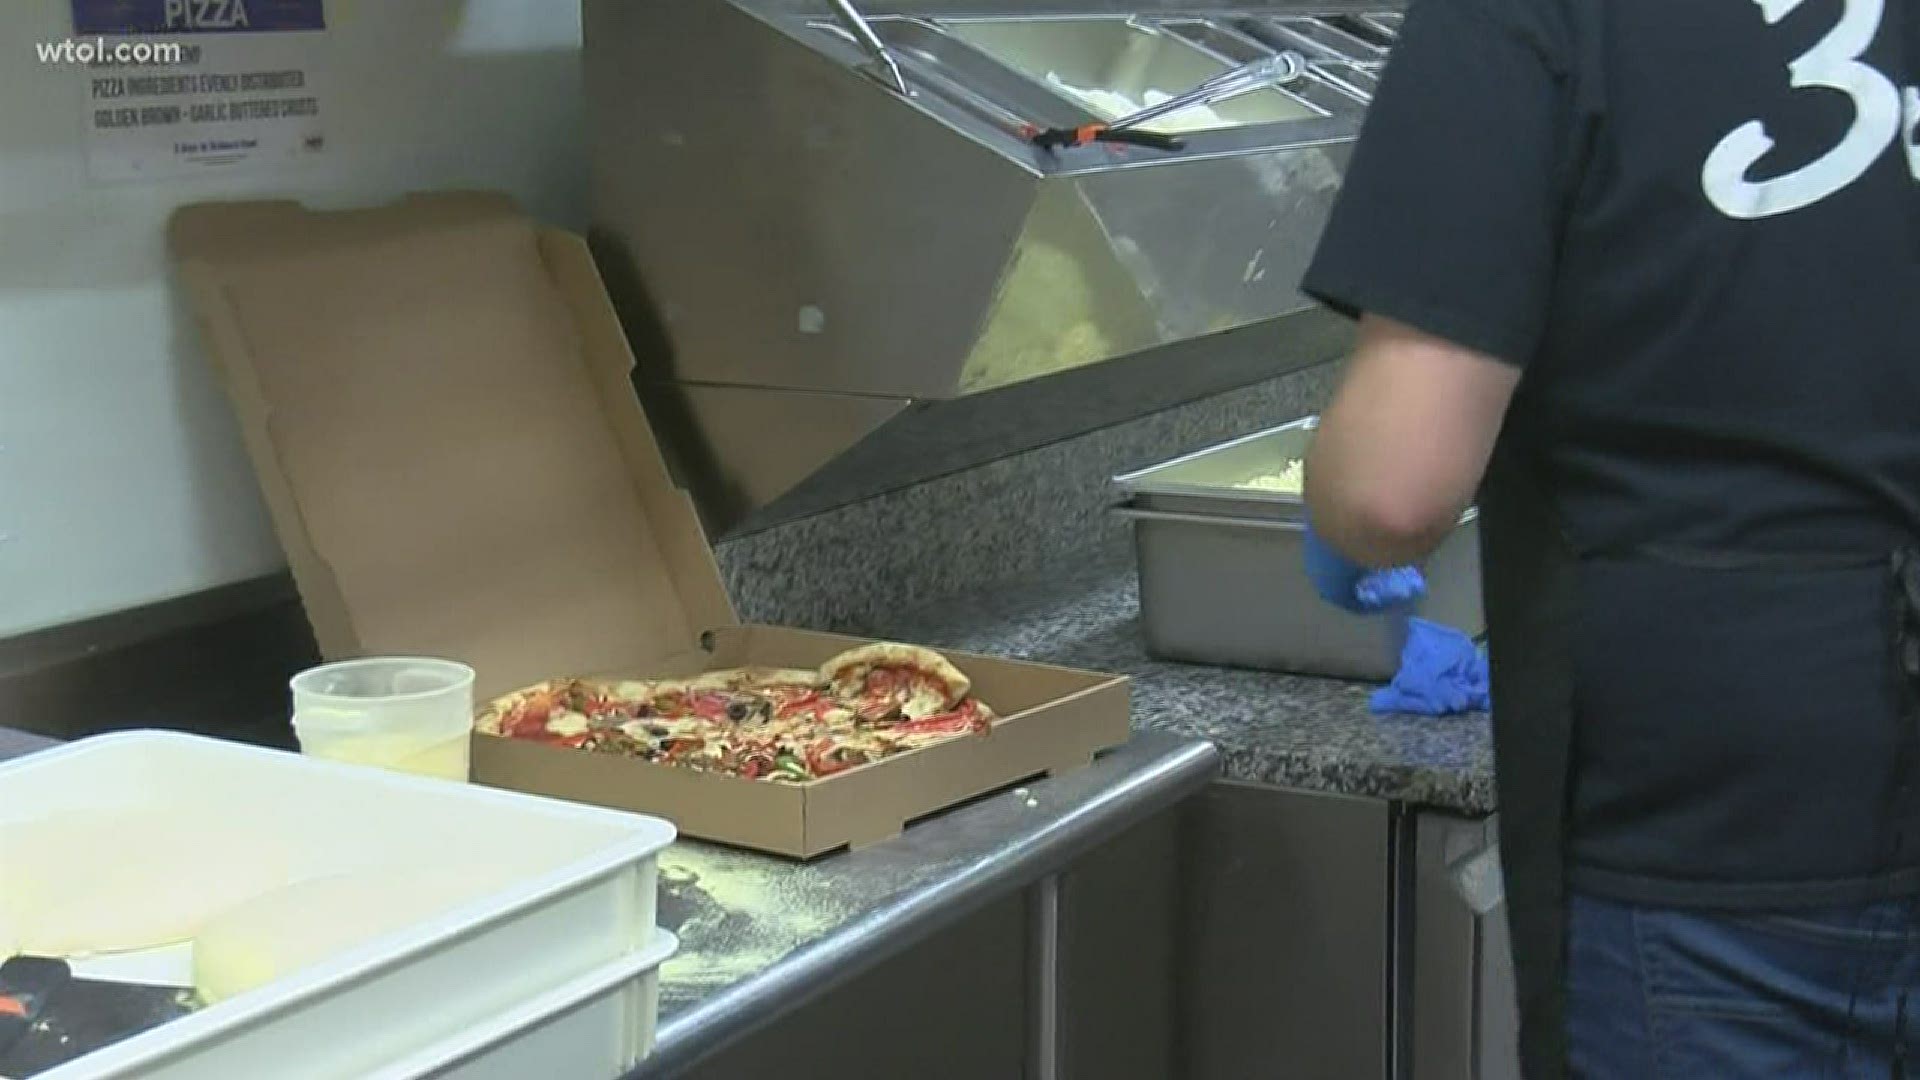 Bubba's 33 are up to 953 pizzas and hope to reach their goal by Easter Sunday.